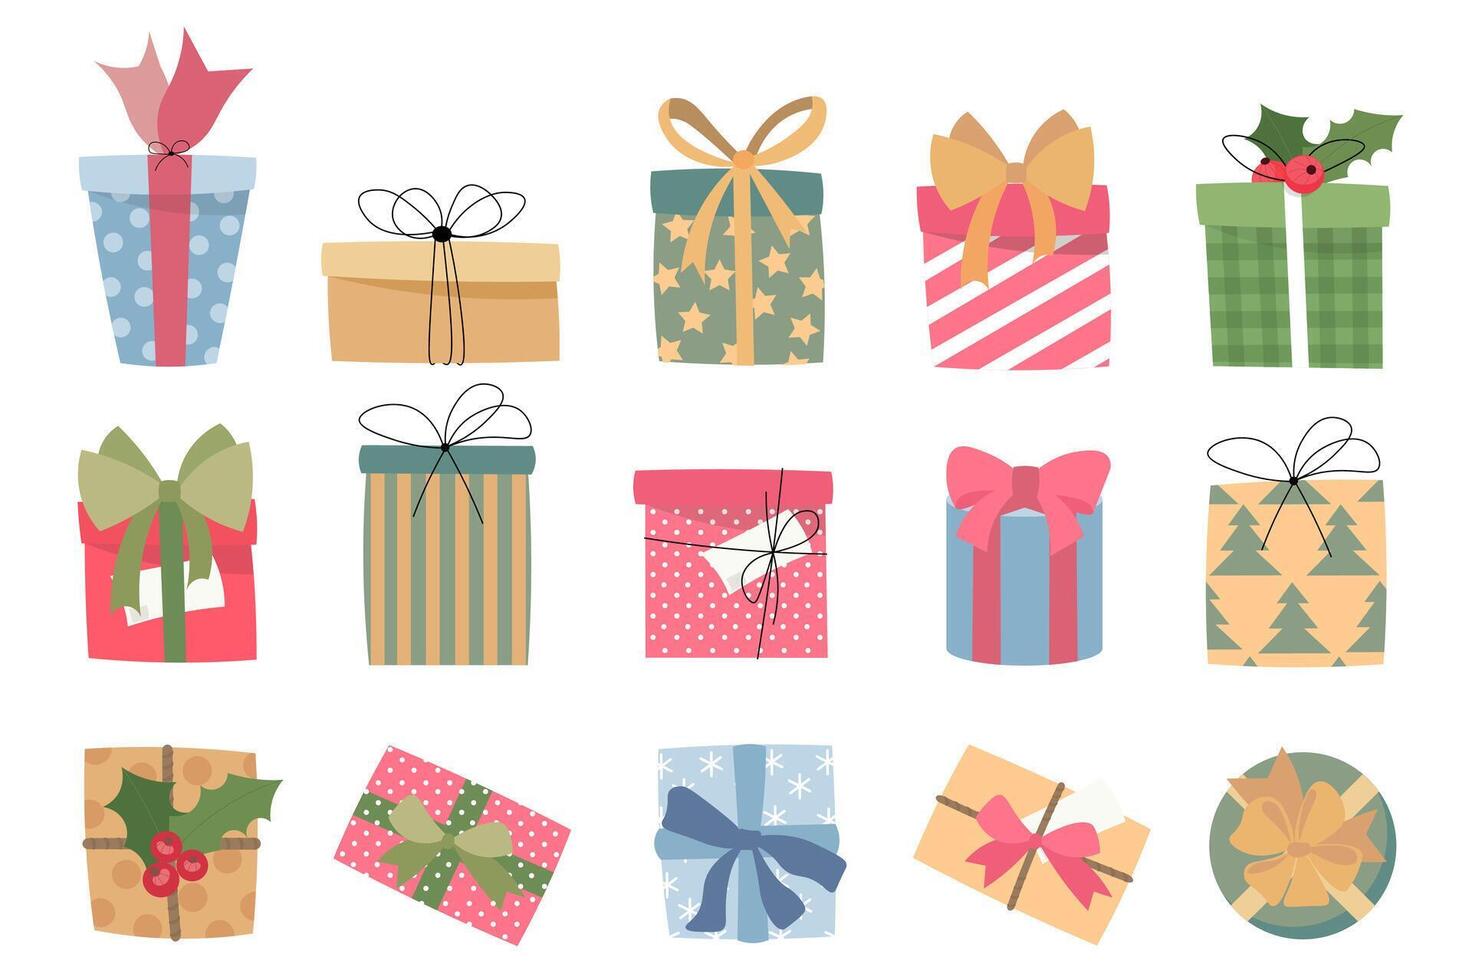 Presents mega set elements in flat design. Bundle of different types of holiday gift boxes with bows, holly, ribbons, striped or printed wrapping paper. Vector illustration isolated graphic objects